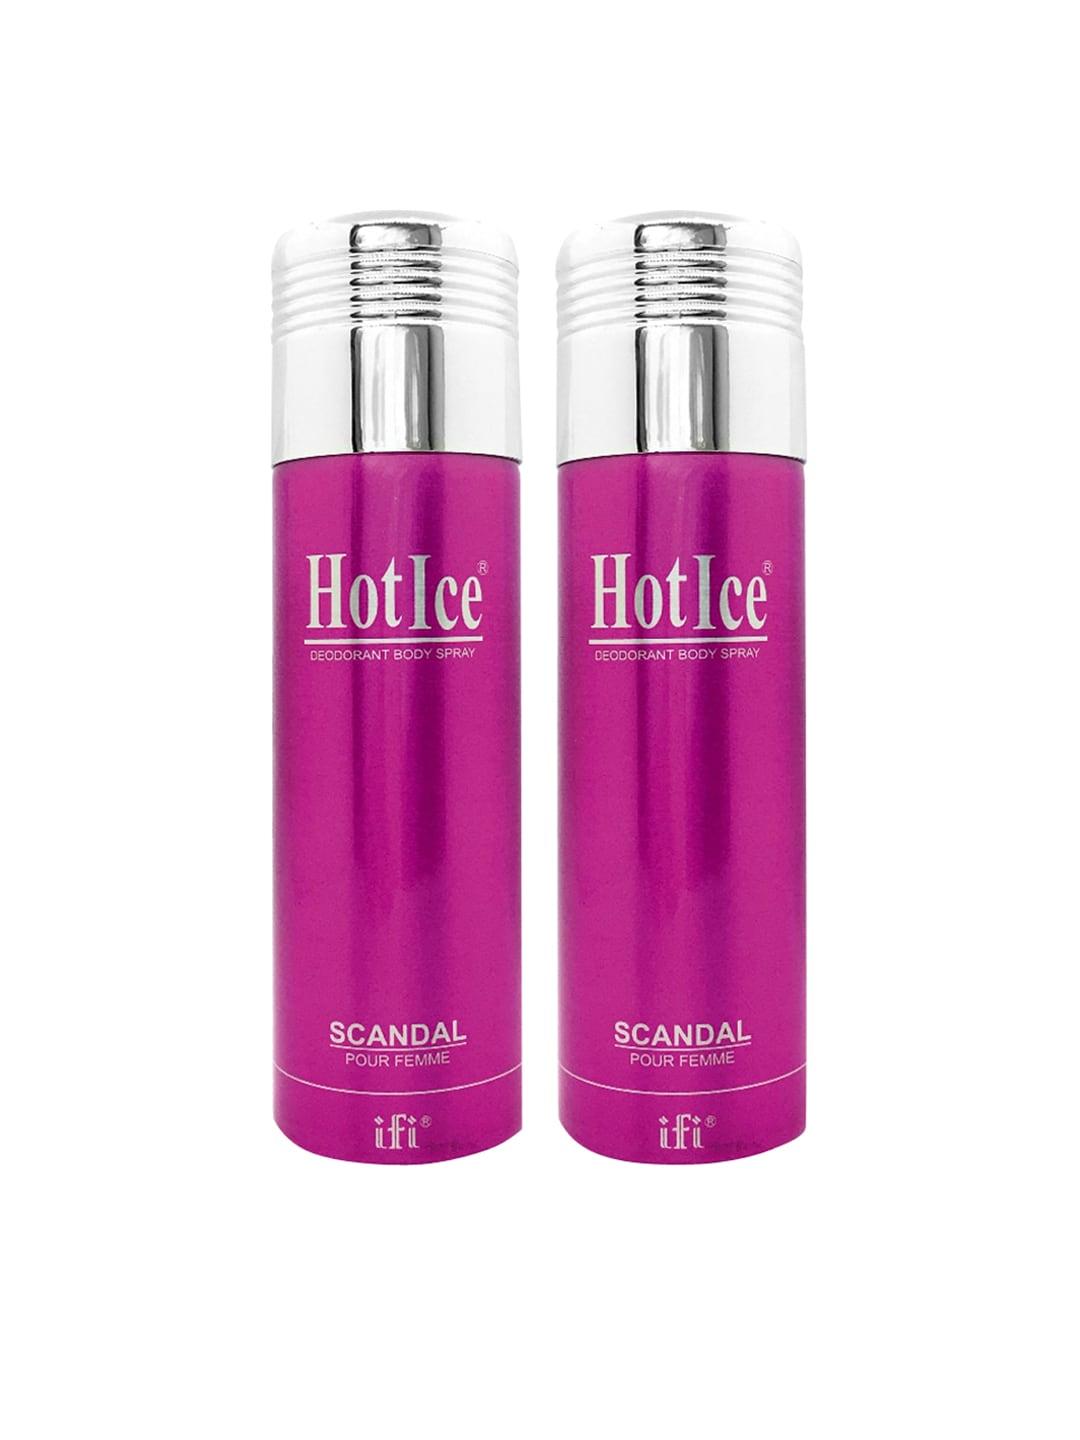 Hot Ice Scandal Fomme Deodorant, 200ml Each - ( Set of 2)